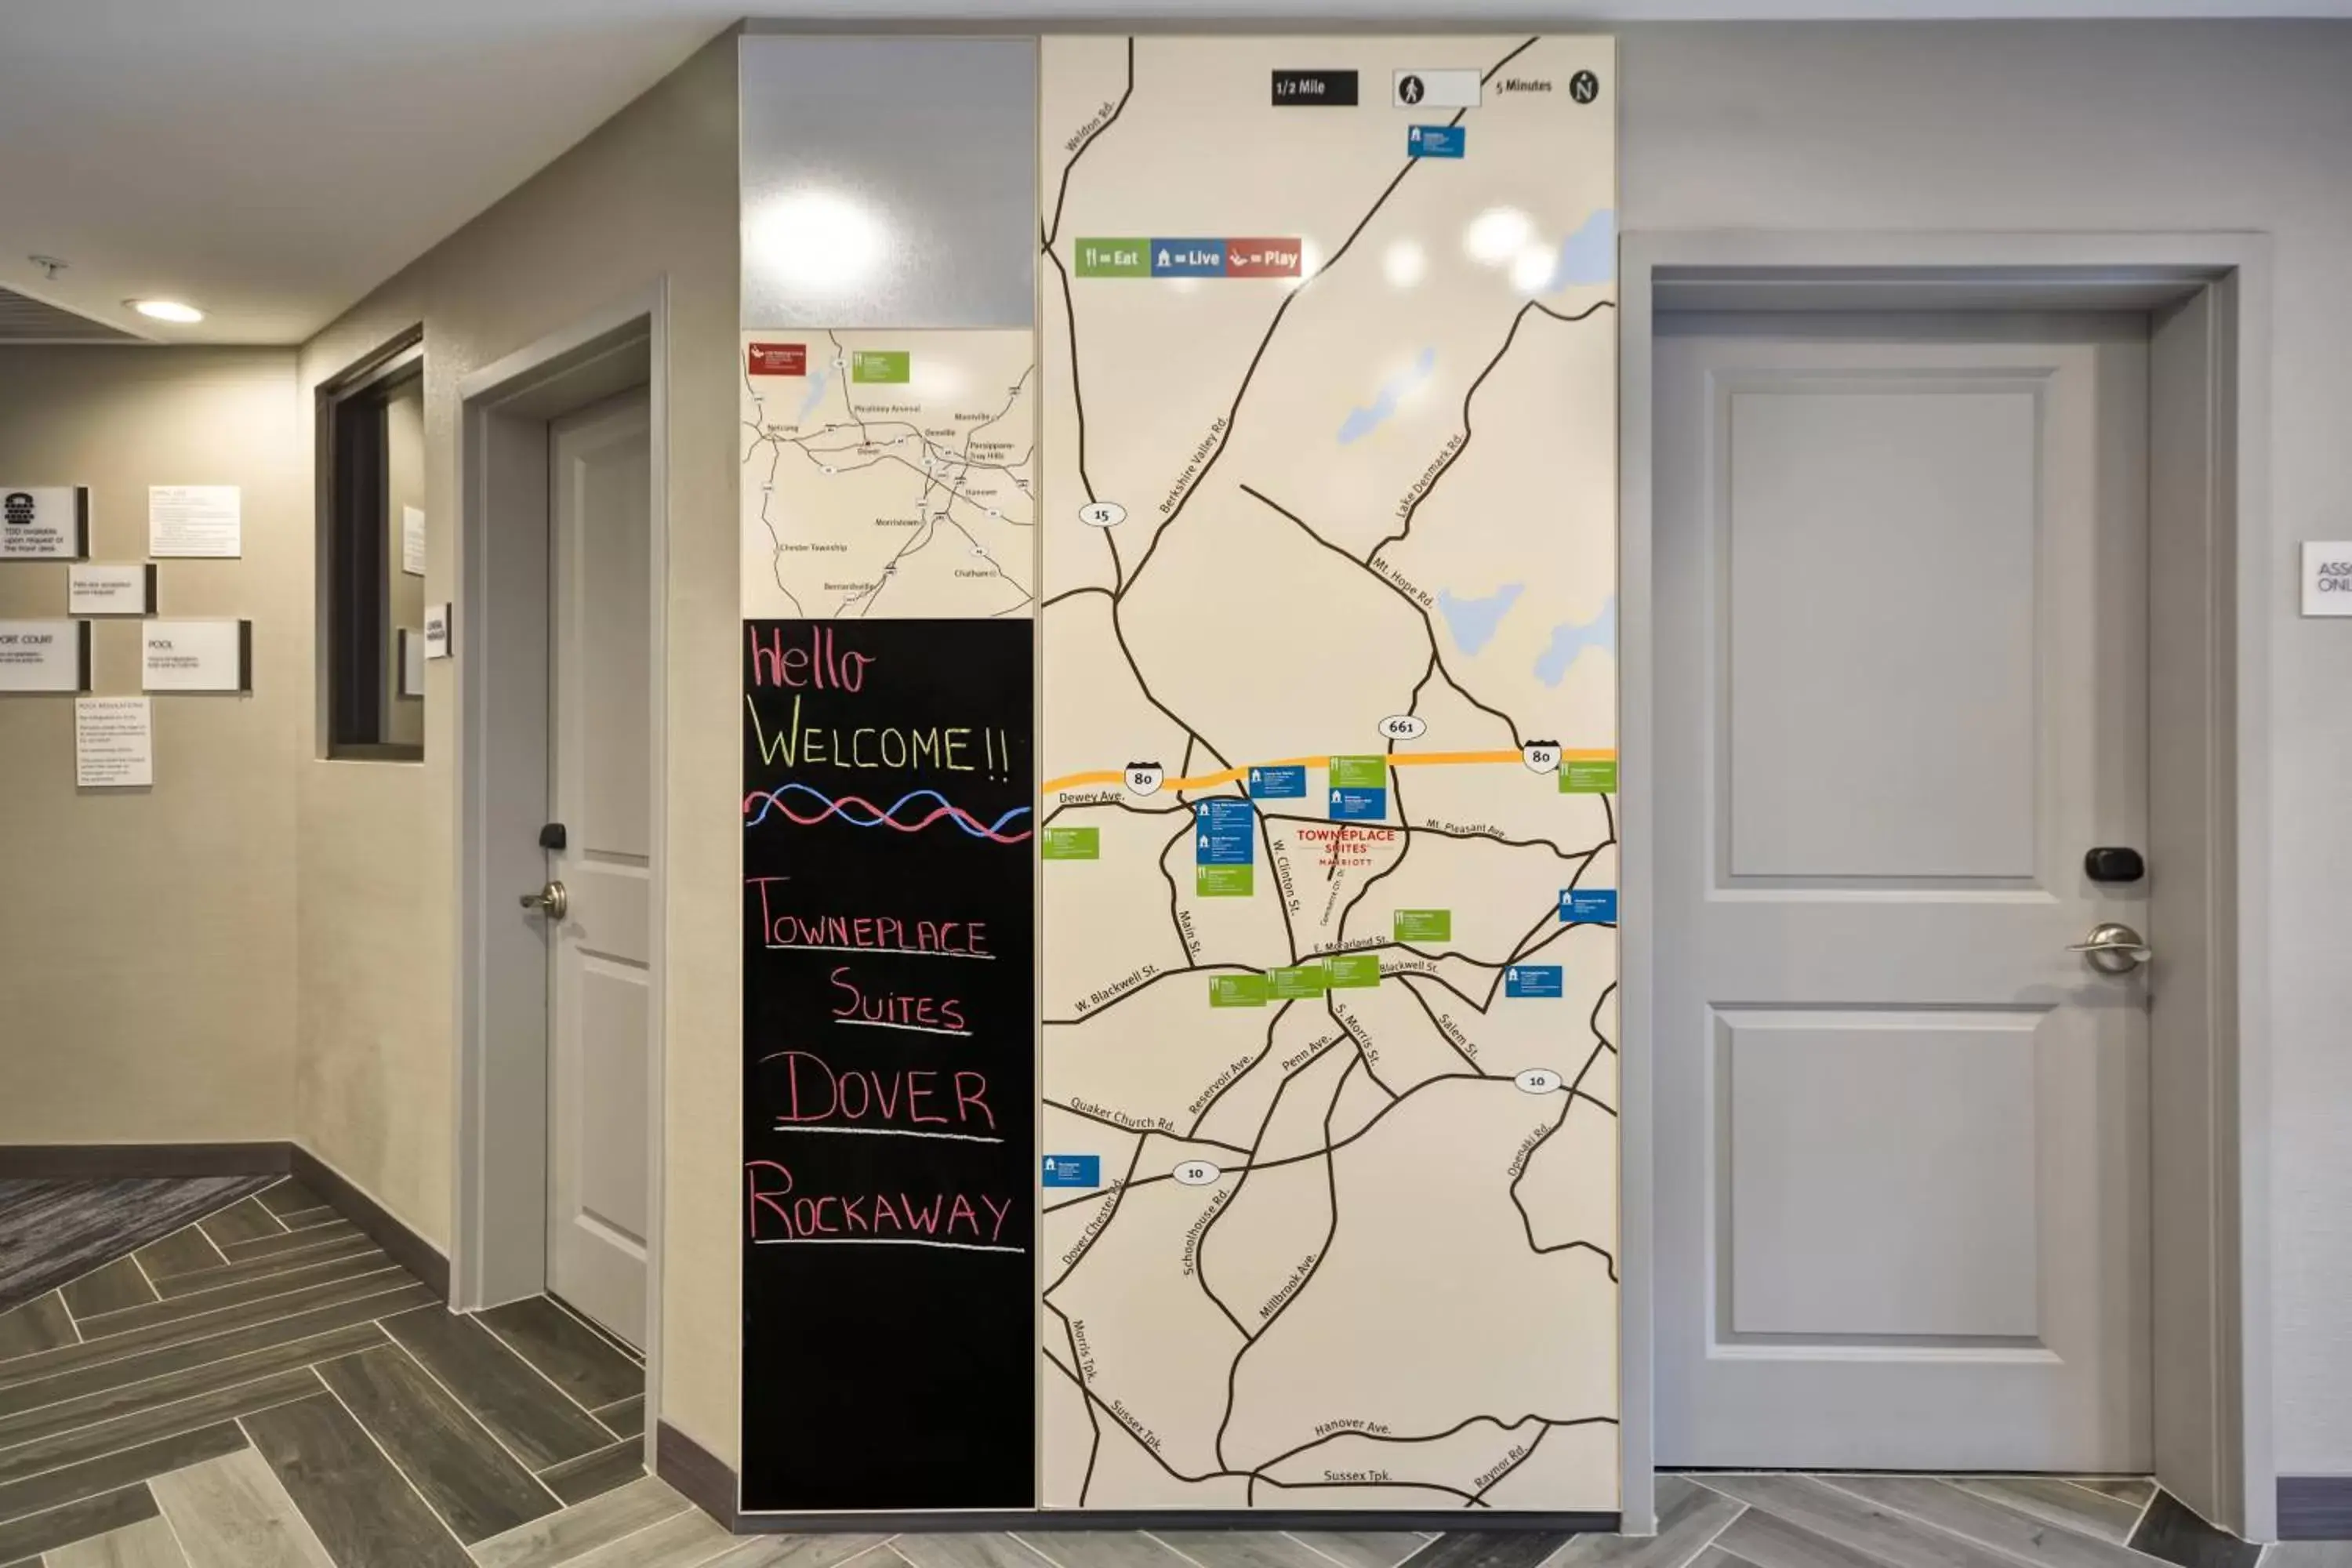 Location in TownePlace Suites by Marriott Dover Rockaway